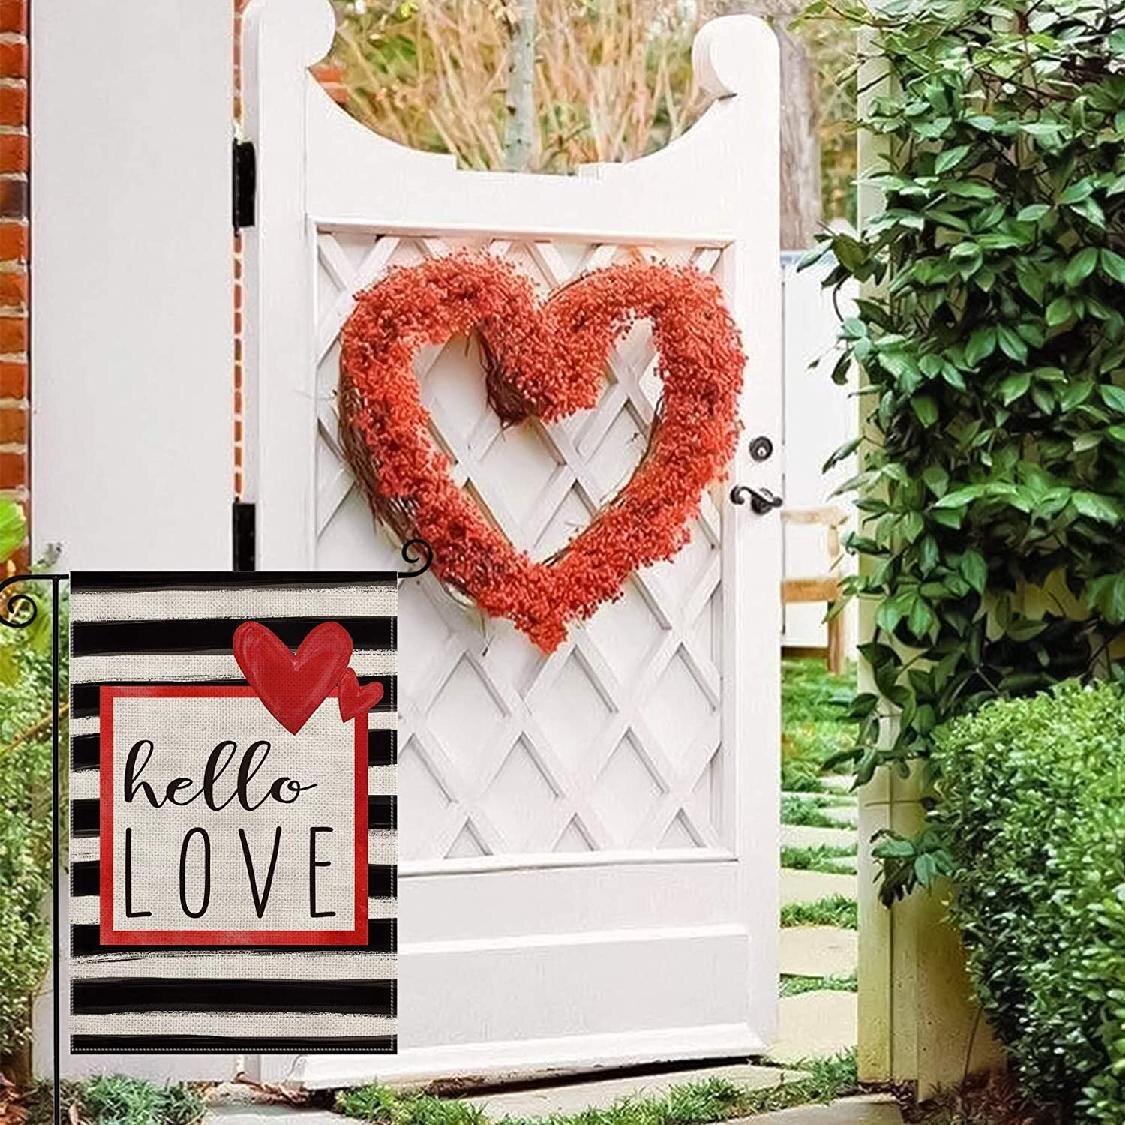 12.5 X 18 Inch Valentine's Day Garden Flag Hearts Printing Outdoor Welcome Decor 